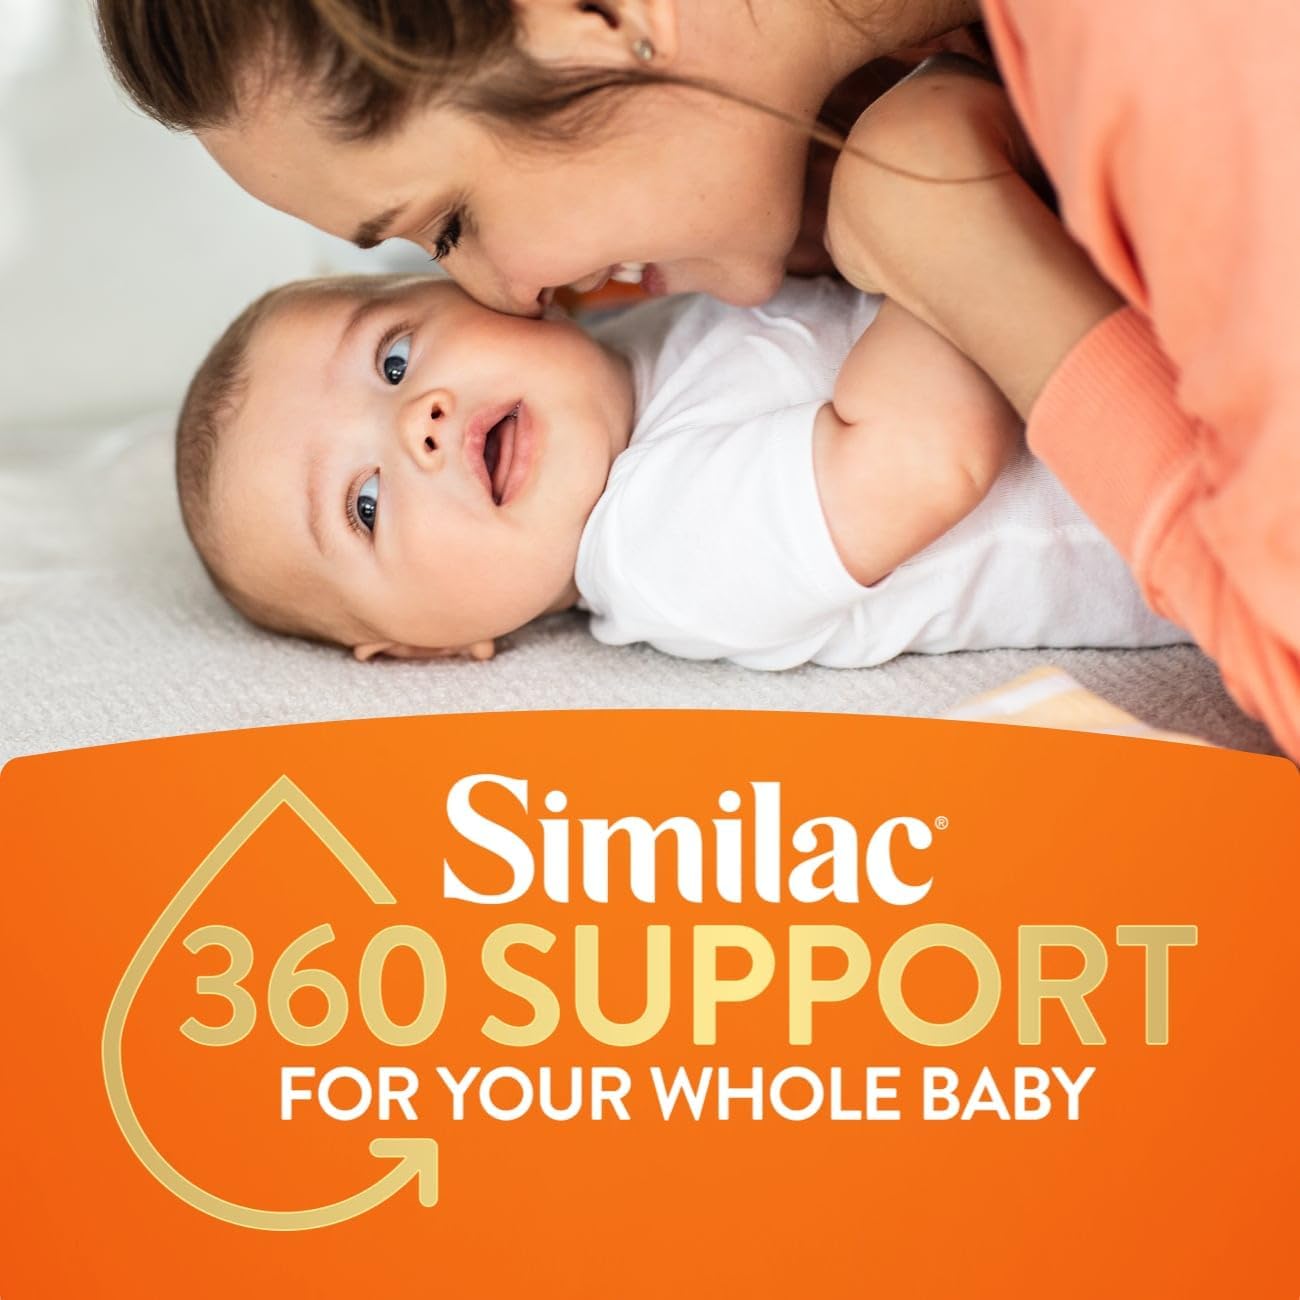 Similac 360 Total Care Sensitive Infant Formula, with 5 HMO Prebiotics, for Fussiness & Gas Due to Lactose Sensitivity, Non-GMO, Baby Formula Powder, 30.2-oz Can (Pack of 1)